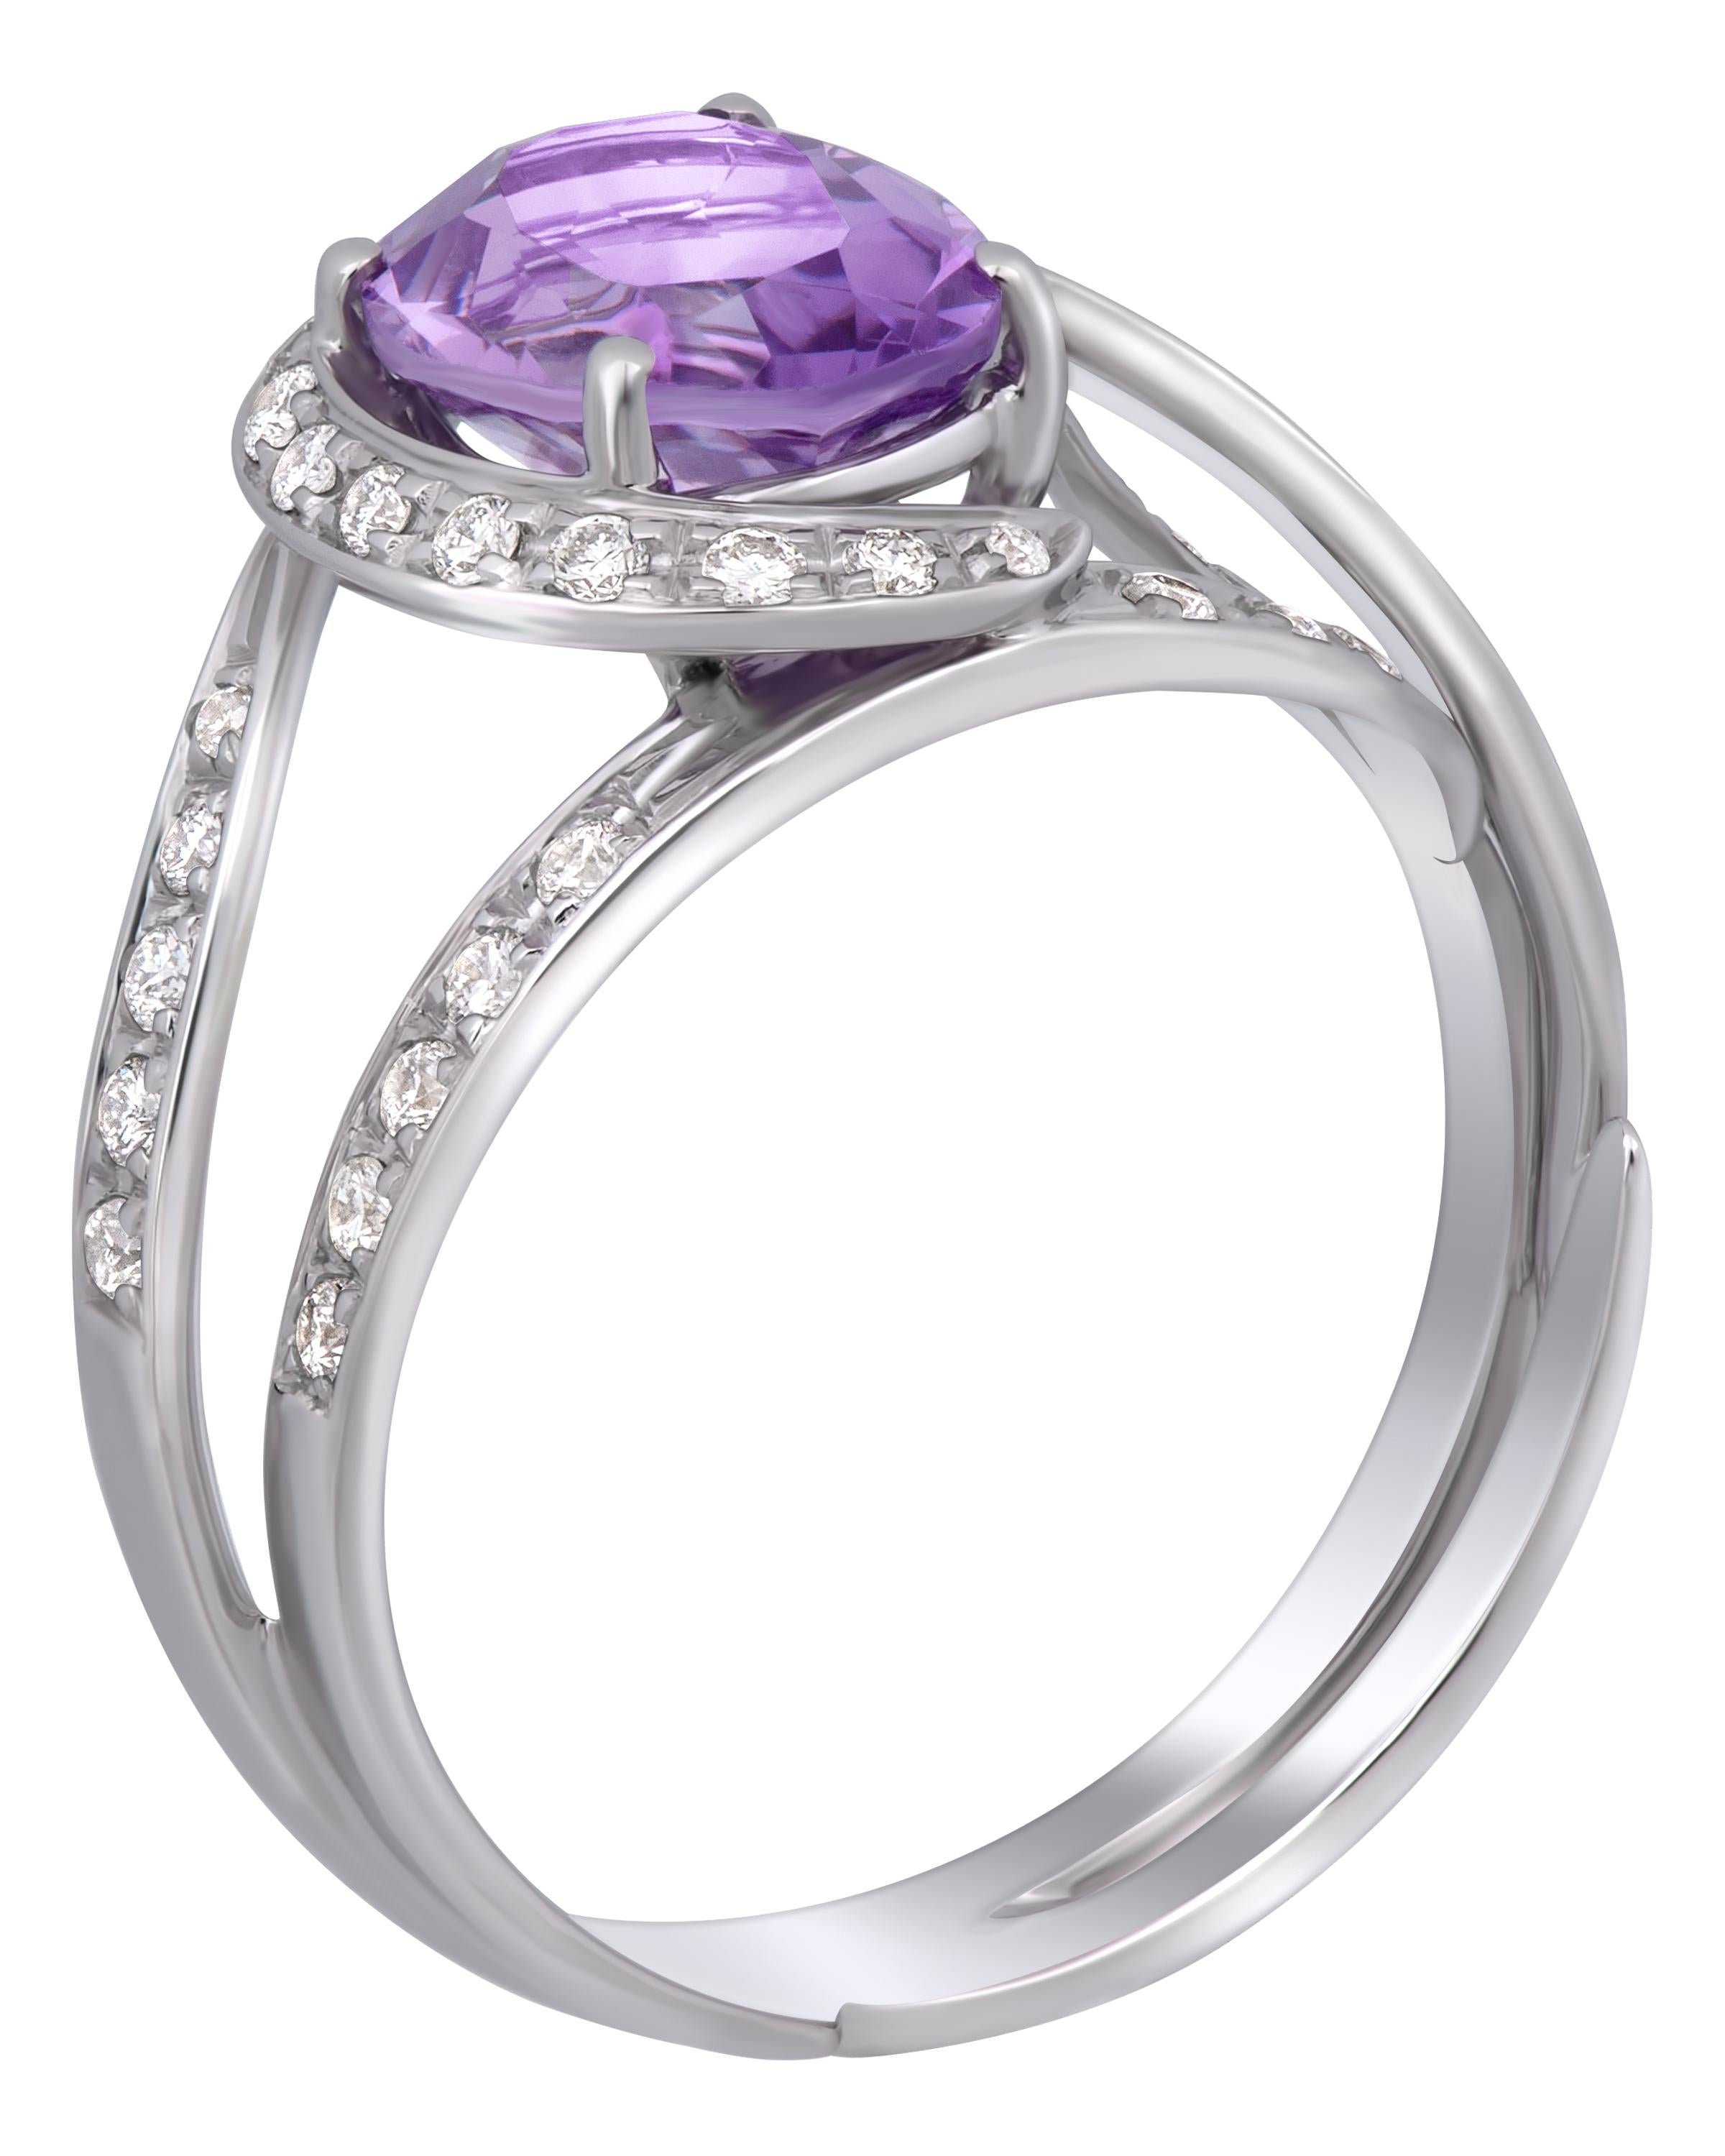 Contemporary Salvini 18K White Gold, Amethyst & Diamond Crossover Ring sz 6.5 For Sale